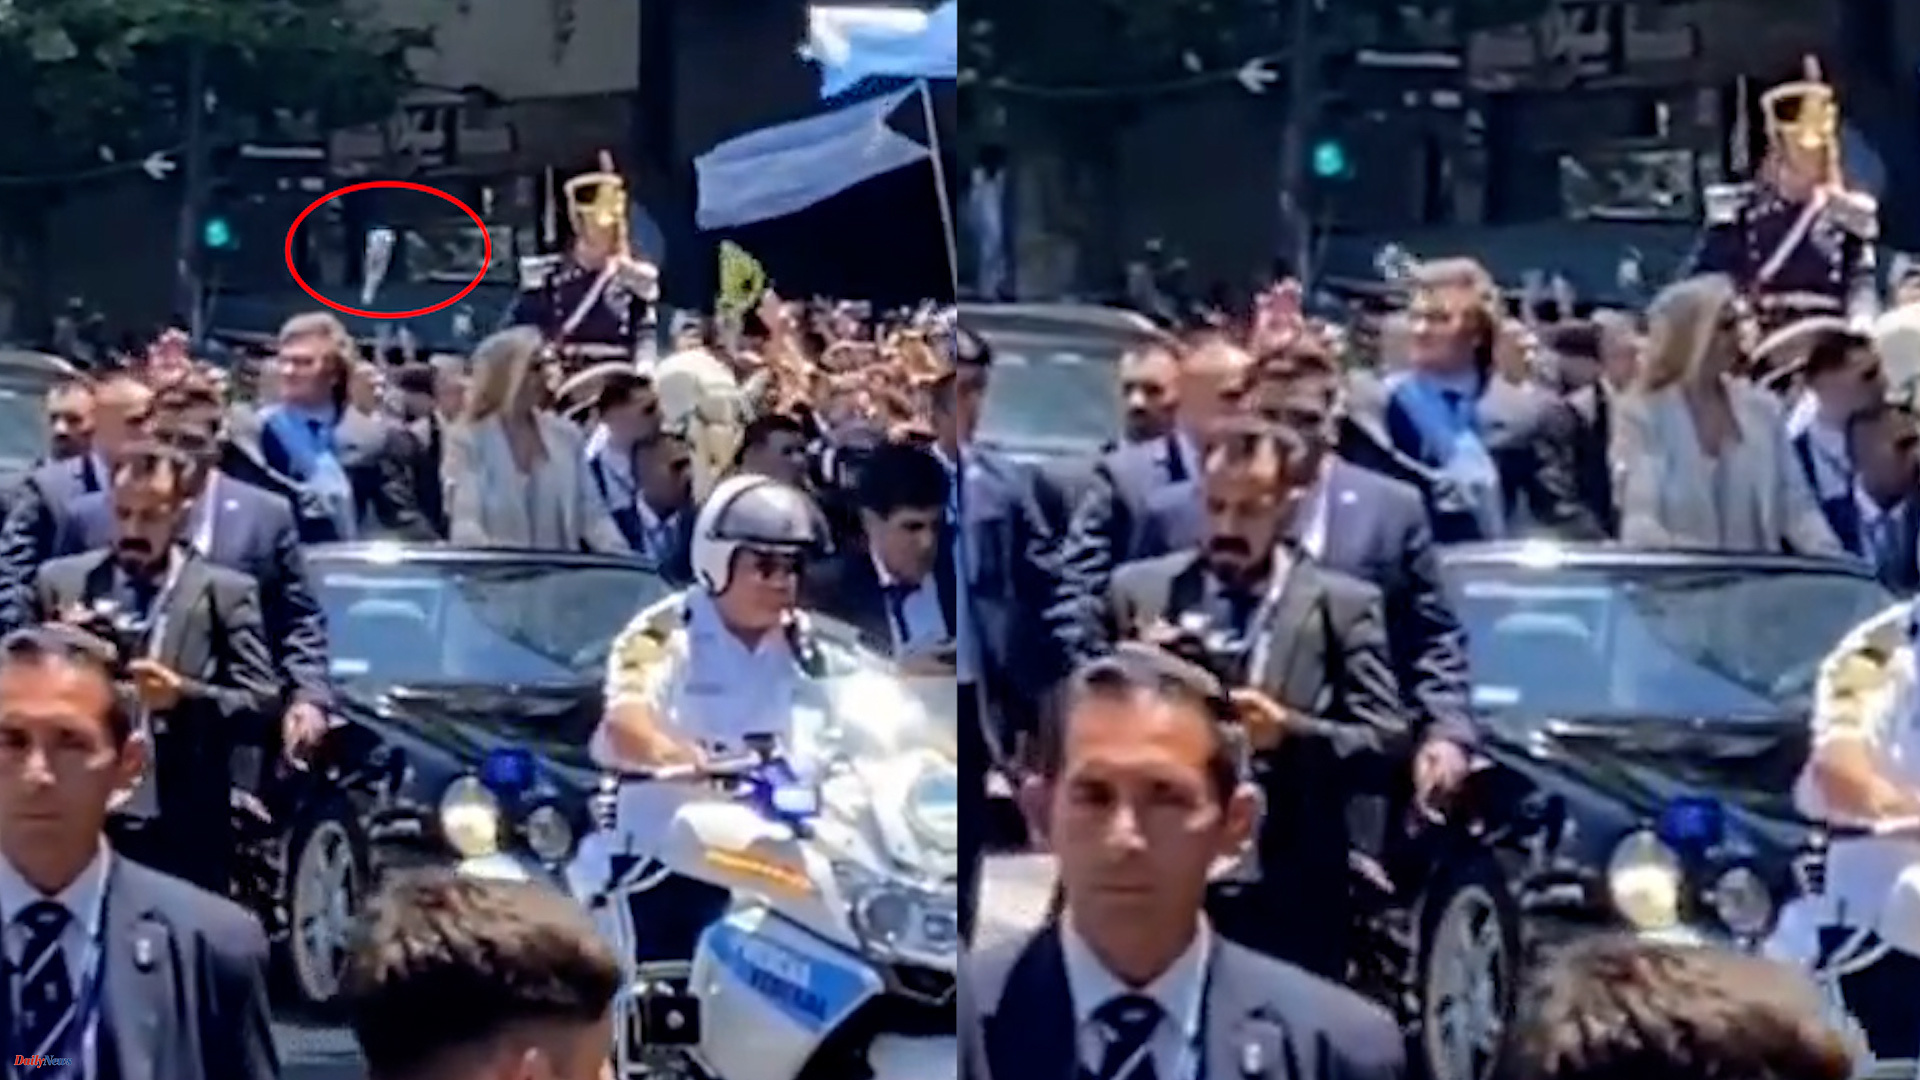 Argentina A bottle thrown at Milei during his inauguration passed inches from his head